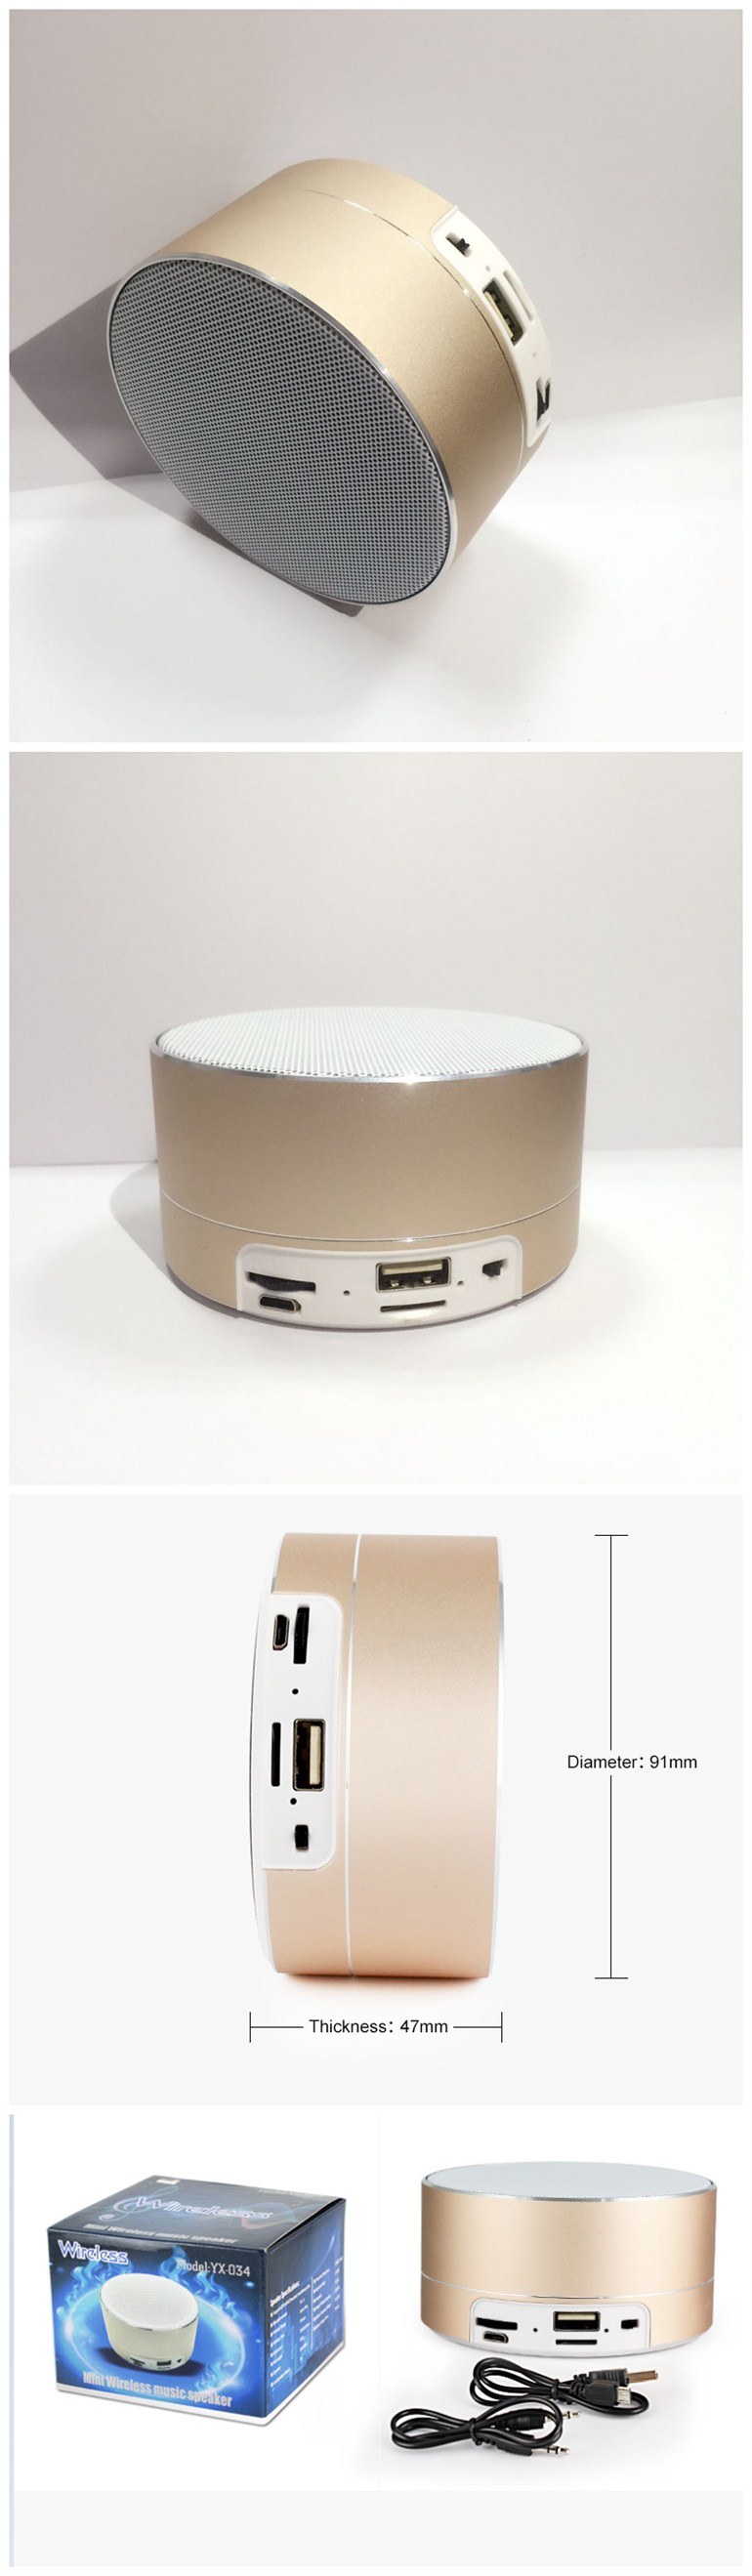 Wholesale Made in China Hot Selling OEM Wireless Mini Bluetooth Speaker